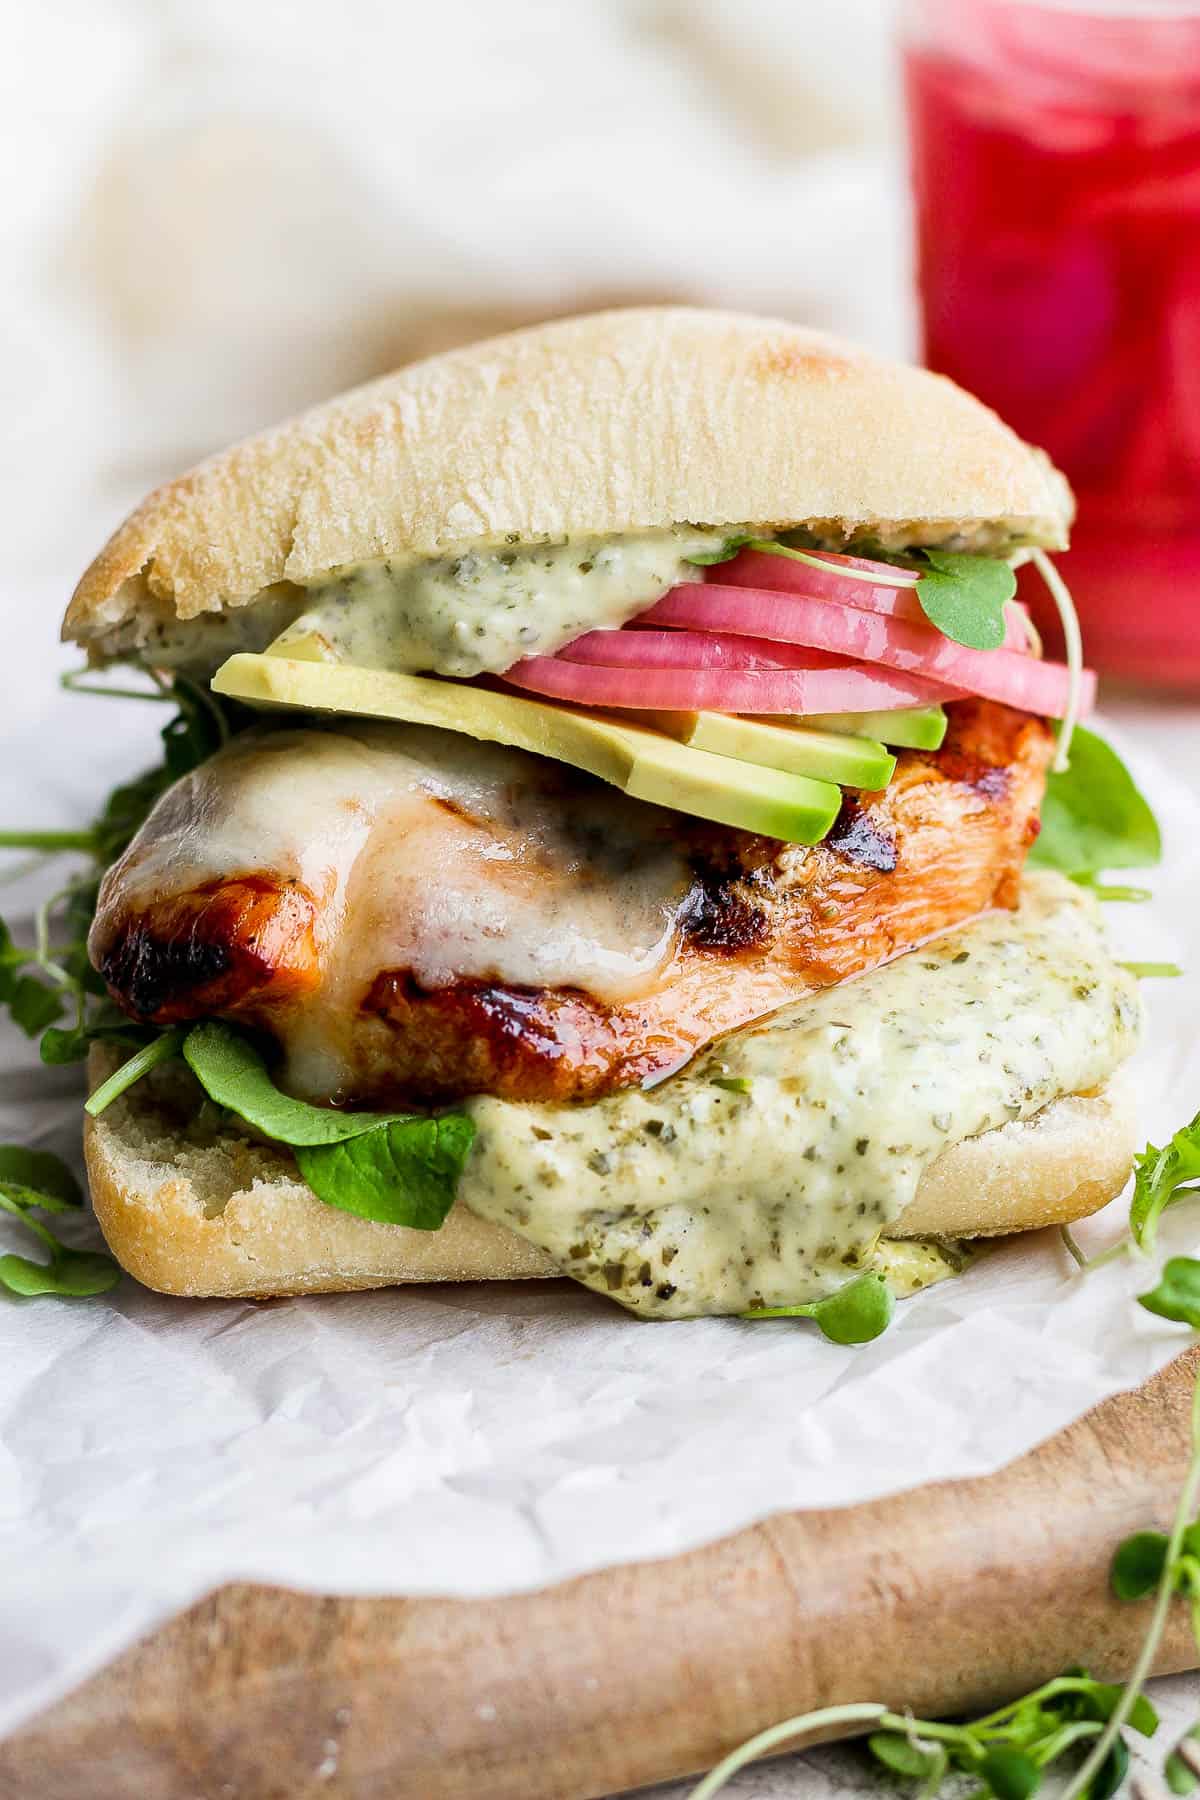 A focaccia bun topped with pesto aioli, arugula, grilled chicken breast, cheese, avocado slices, and pickled onions and topped with the other piece of focaccia bun.